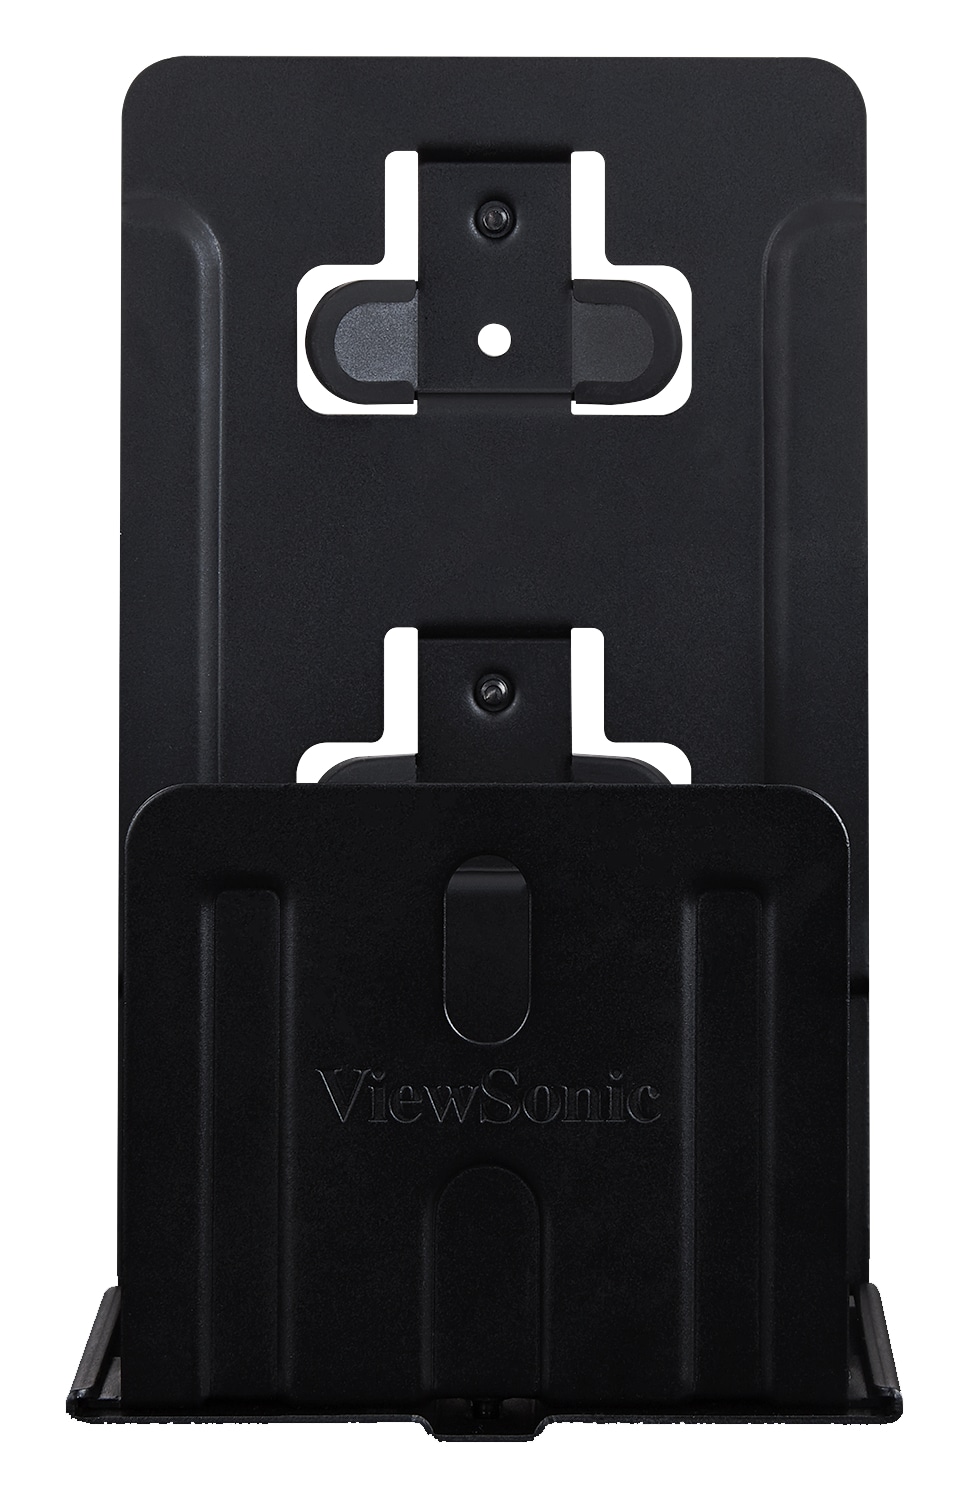 ViewSonic LCD-CMK-001 Ceiling Mount for Monitor - Black